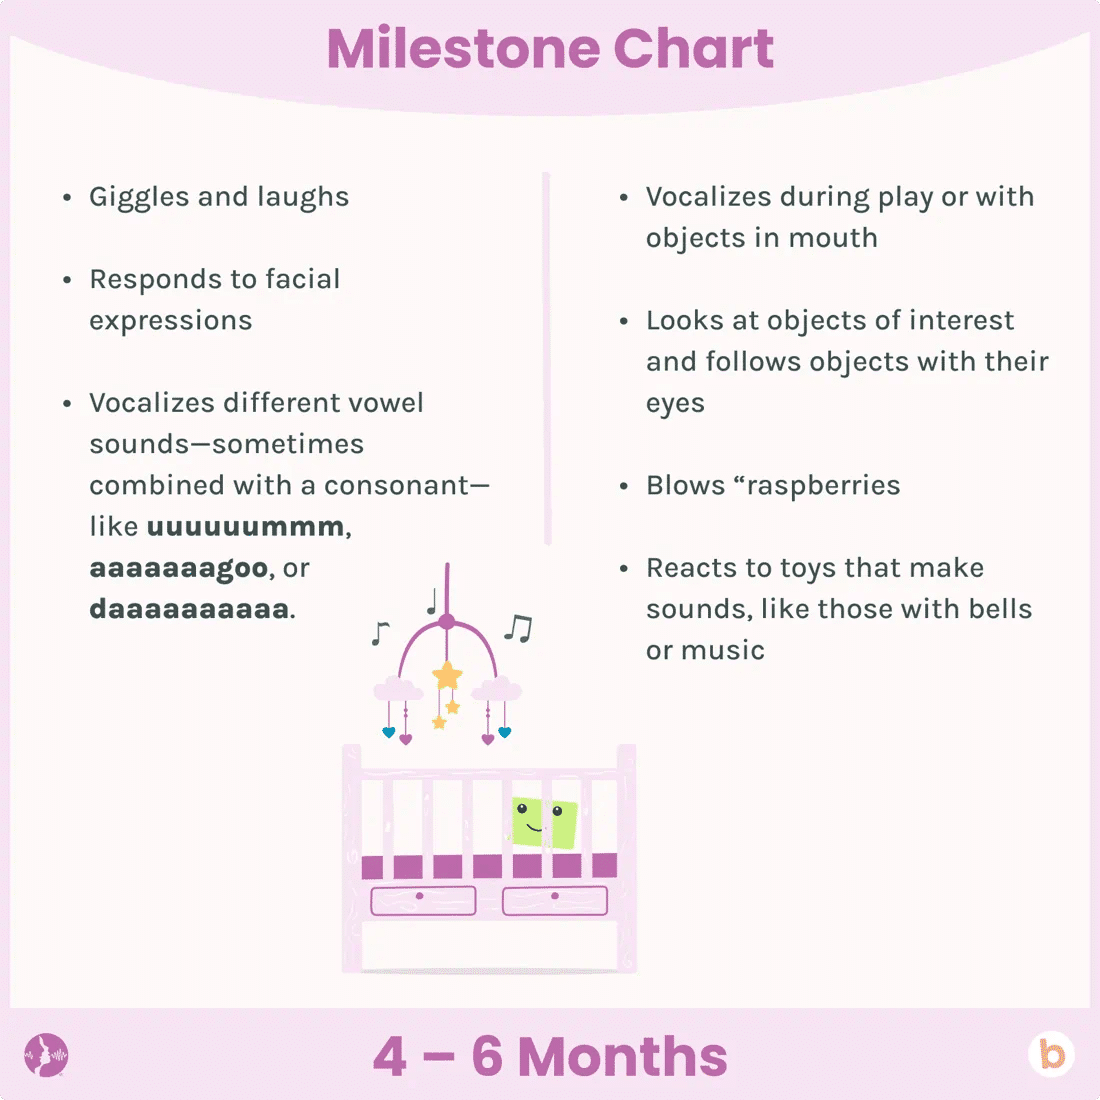 Updated speech language development milestone chart for babies age 4-6 months. The milestones are listed, and there is a graphic of a baby in a crib paying attention to a toy that makes music.